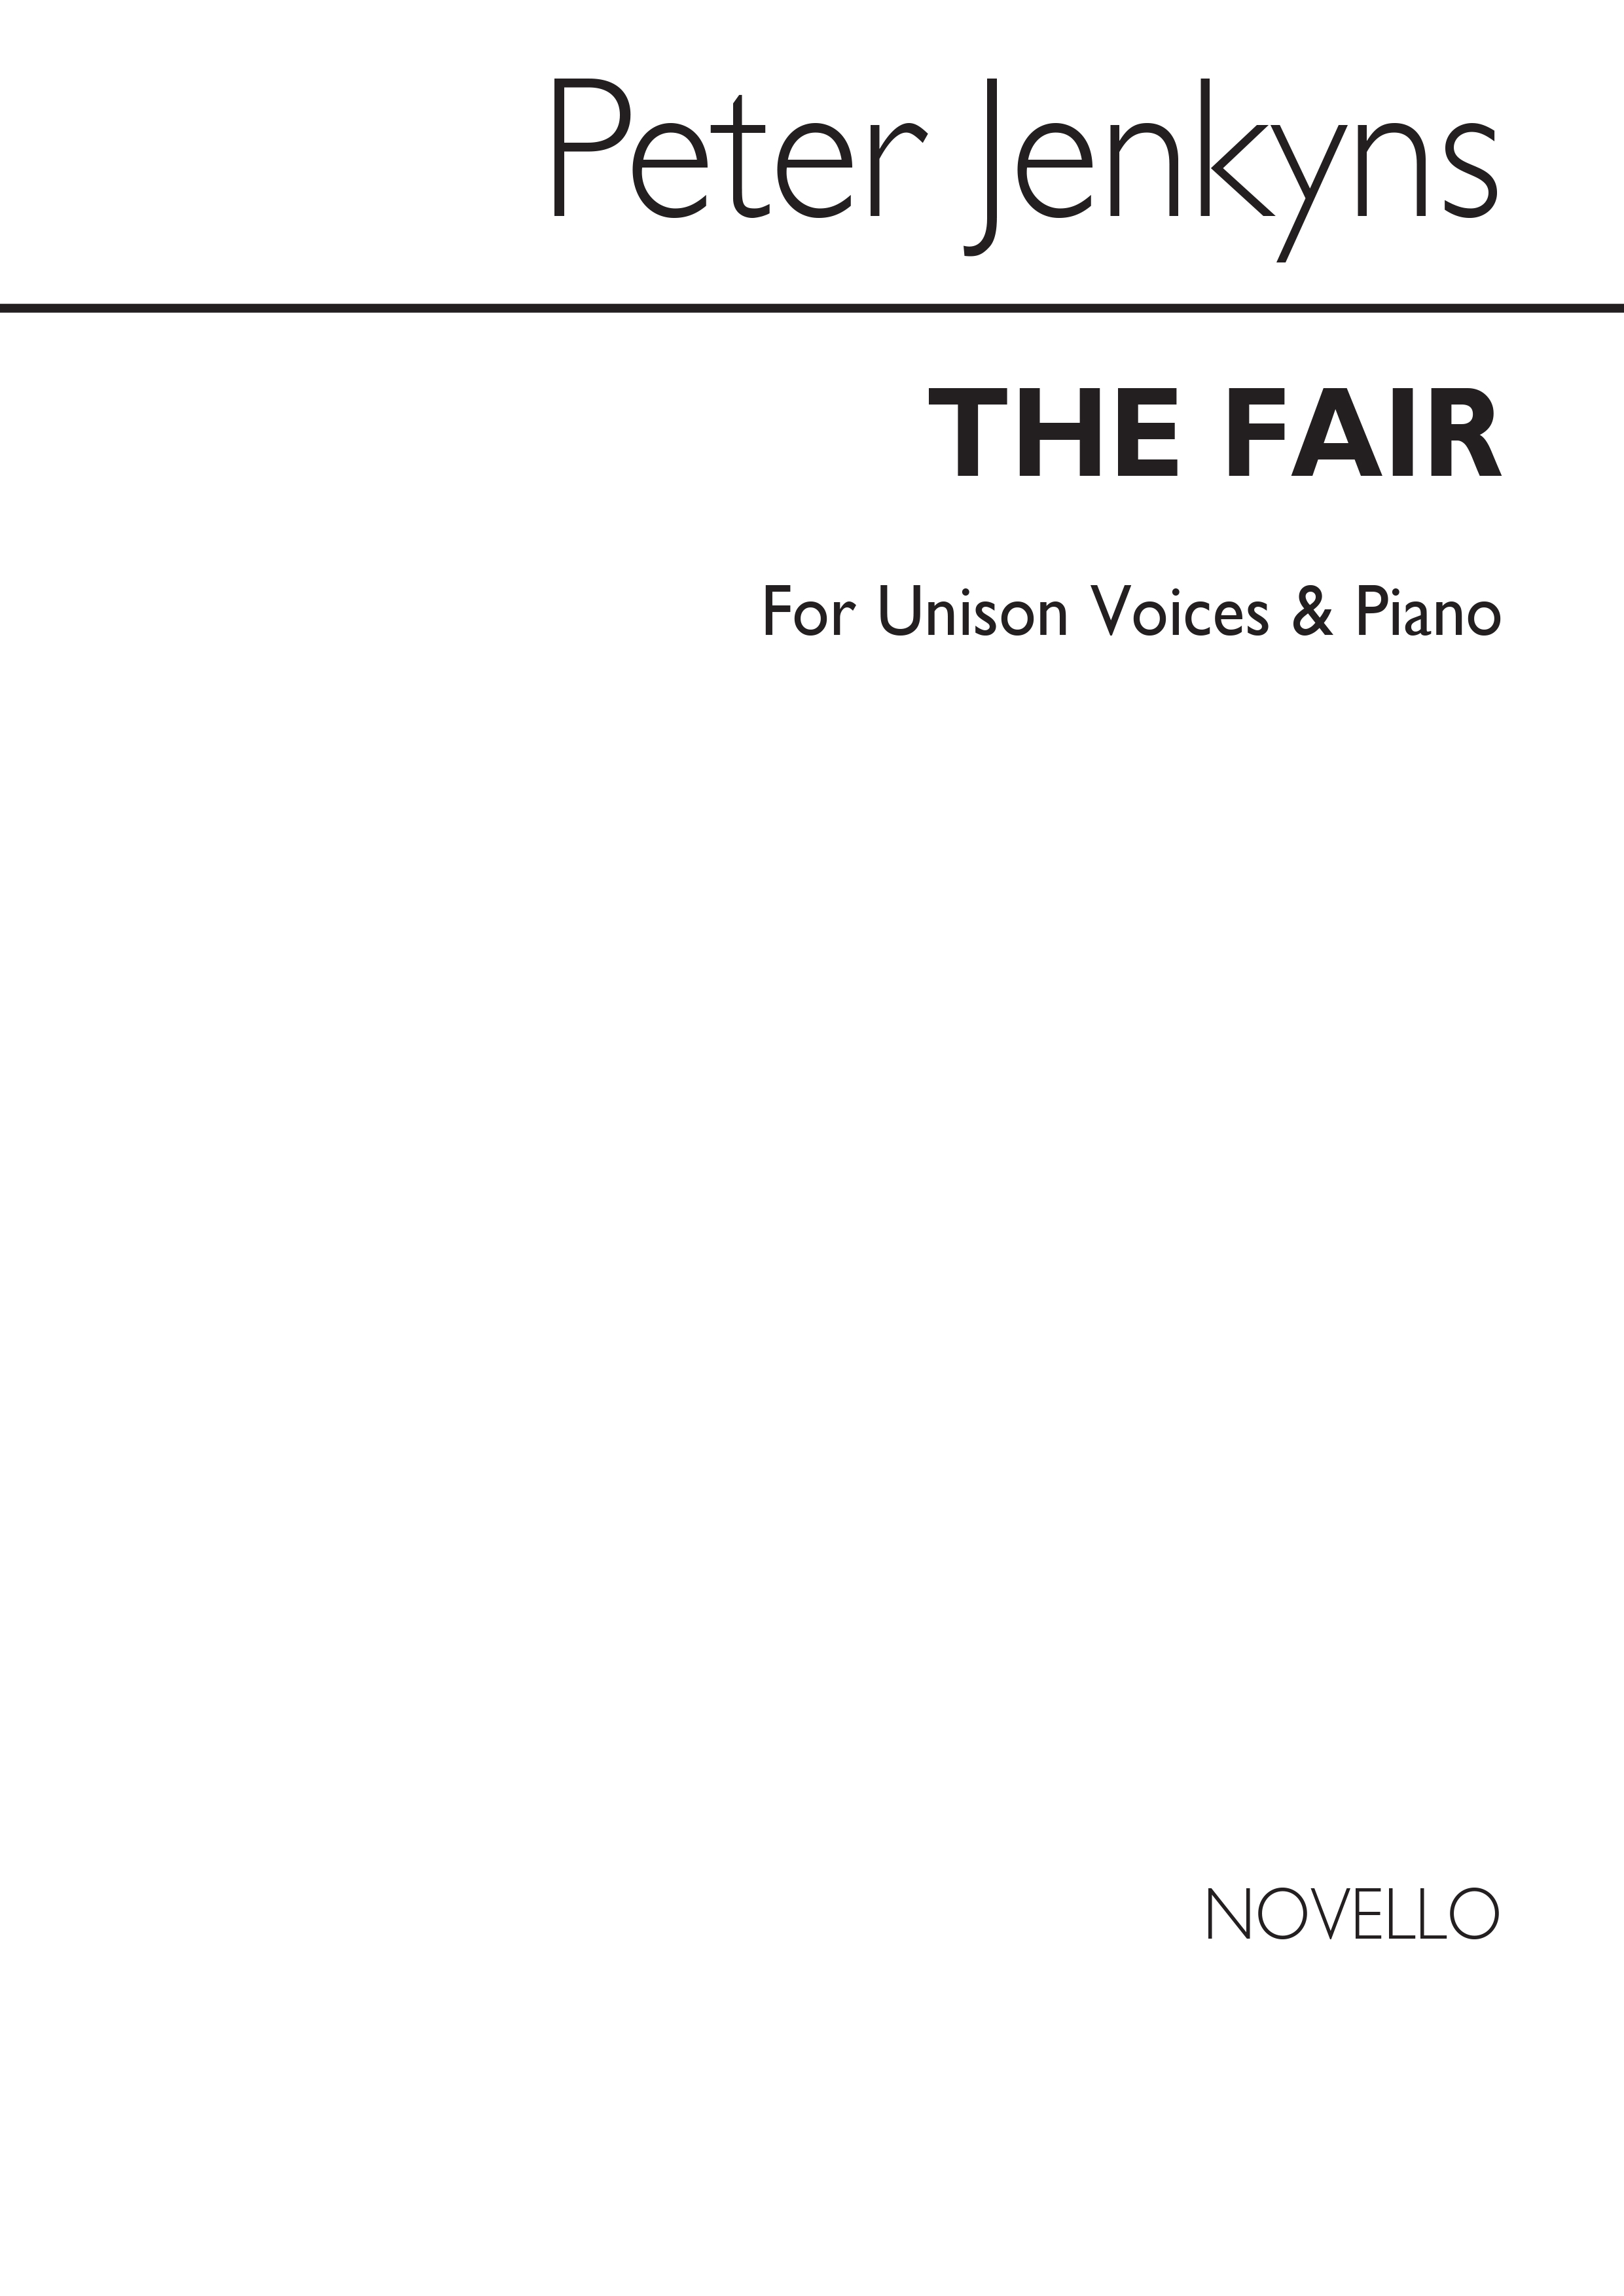 Peter Jenkyns: The Fair for Unison Voices and Piano: Voice: Vocal Score